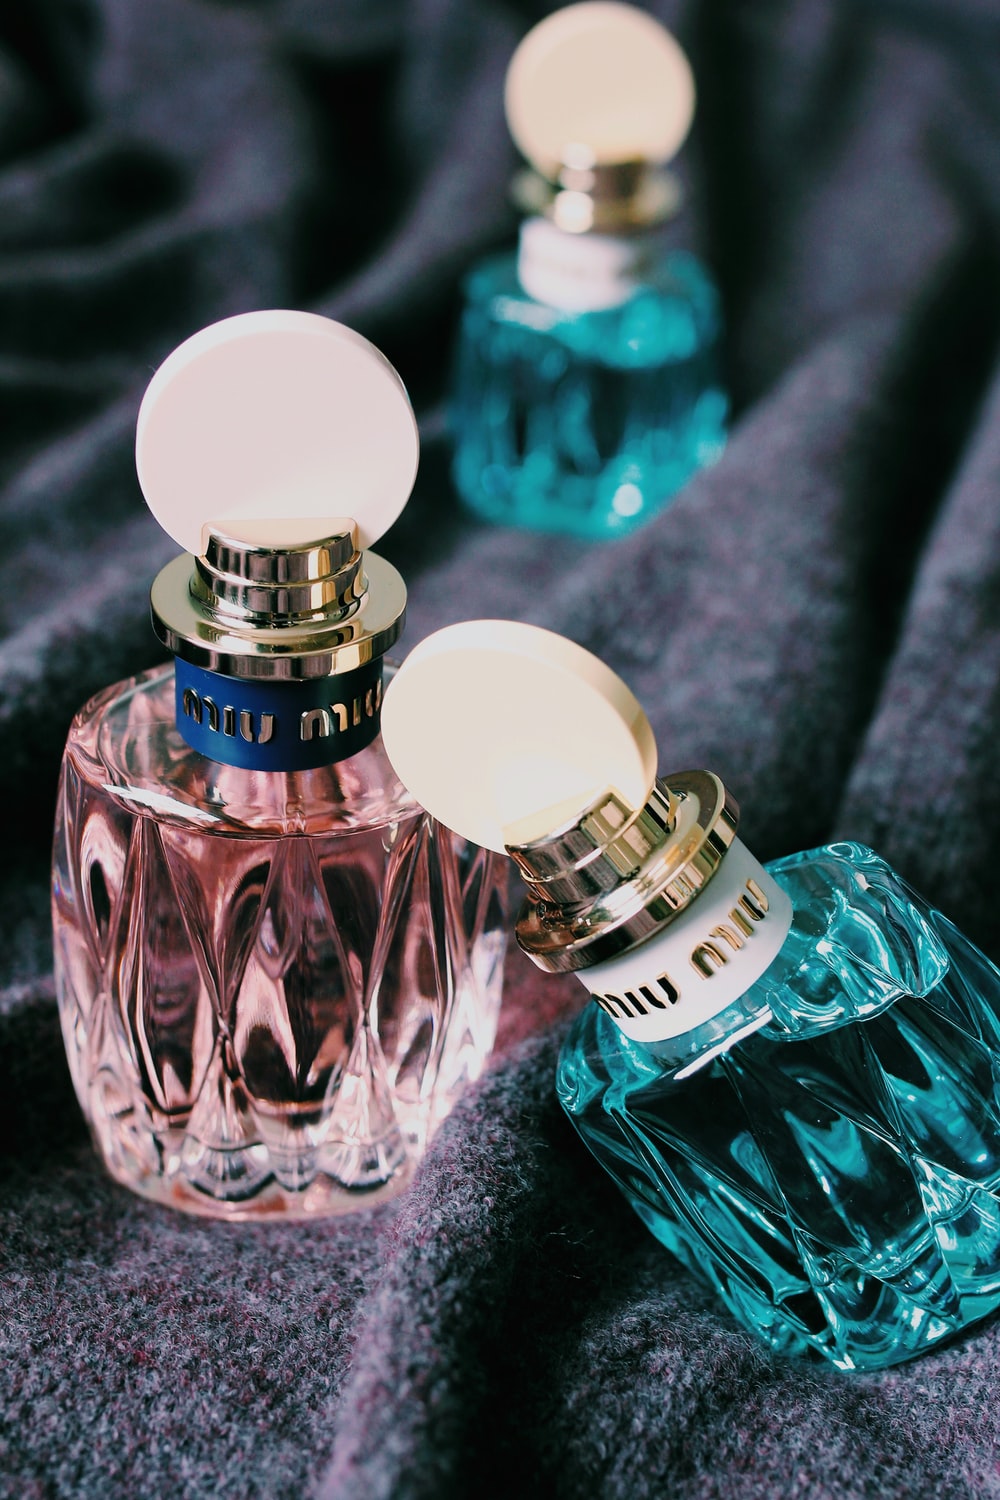 Perfume Picture. Download Free Image